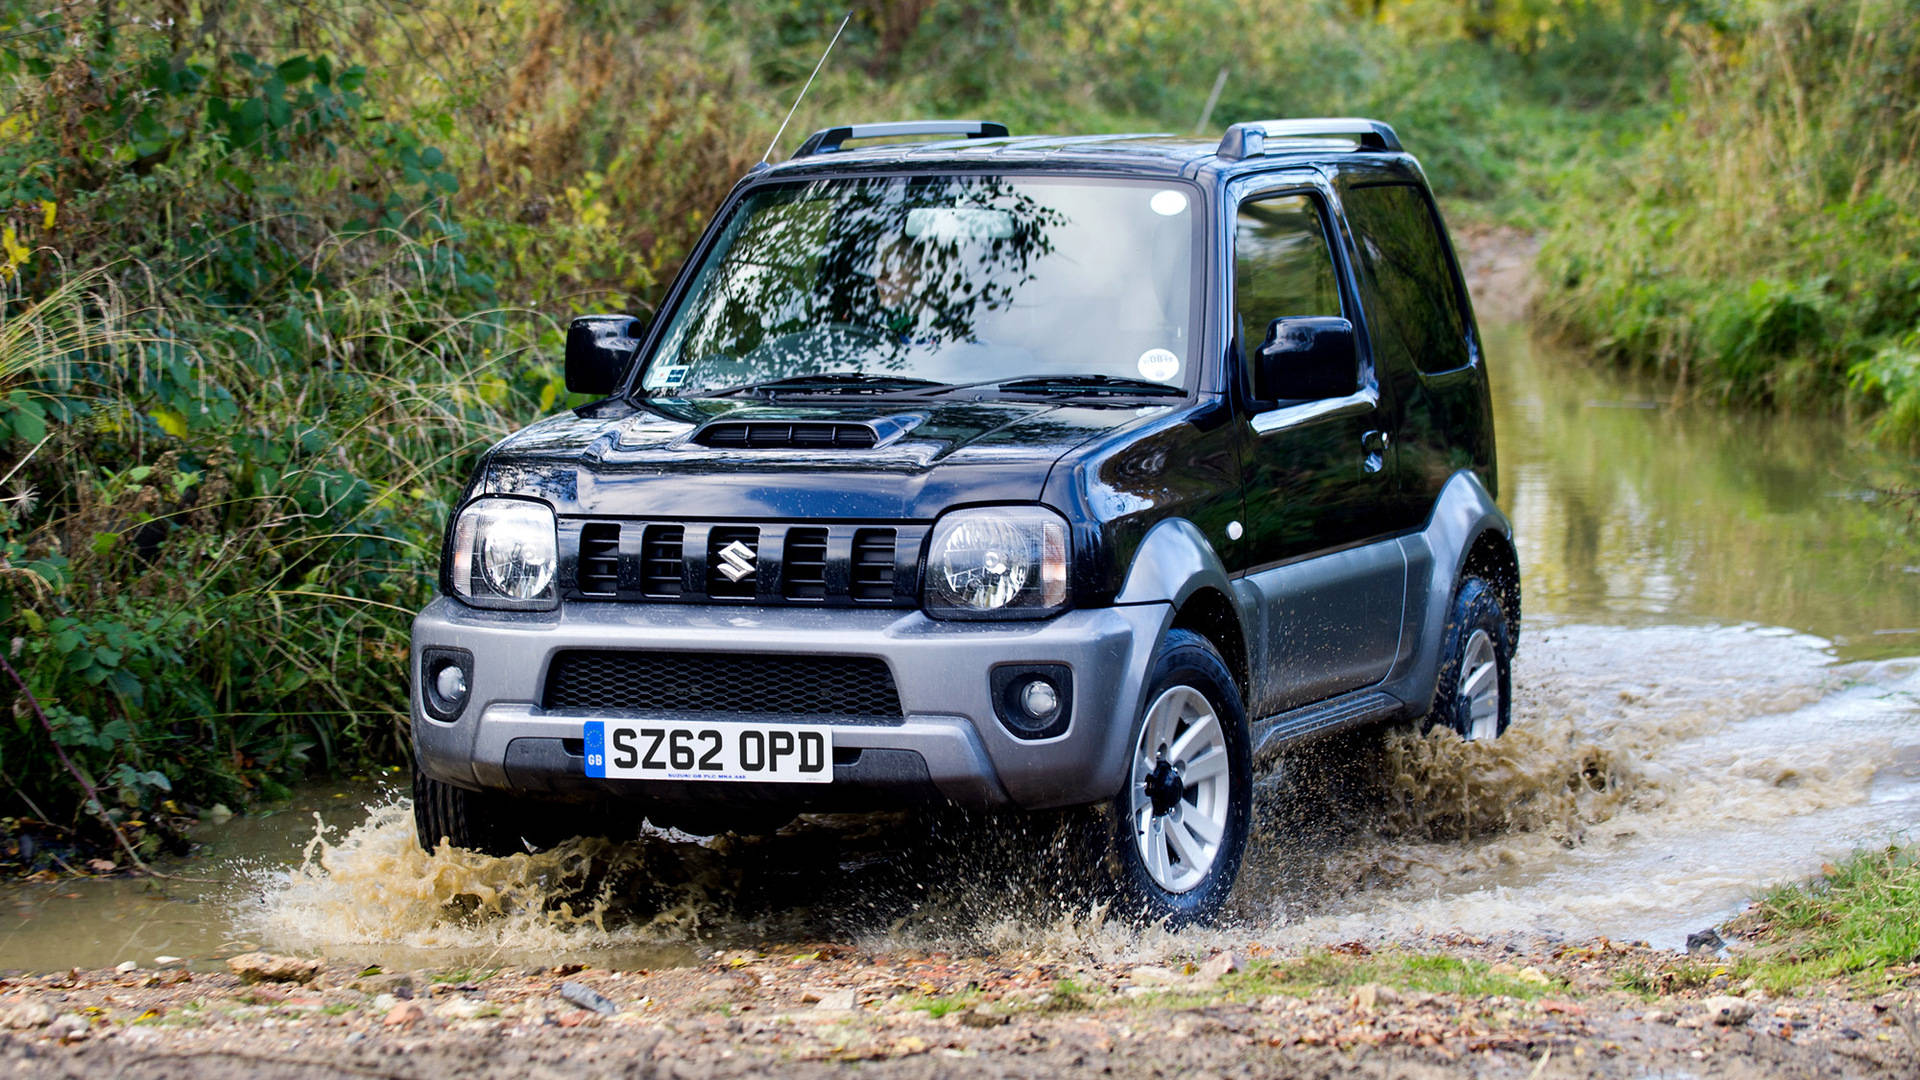 The Endless Road Adventures With The 2012 Suzuki Jimny. Background